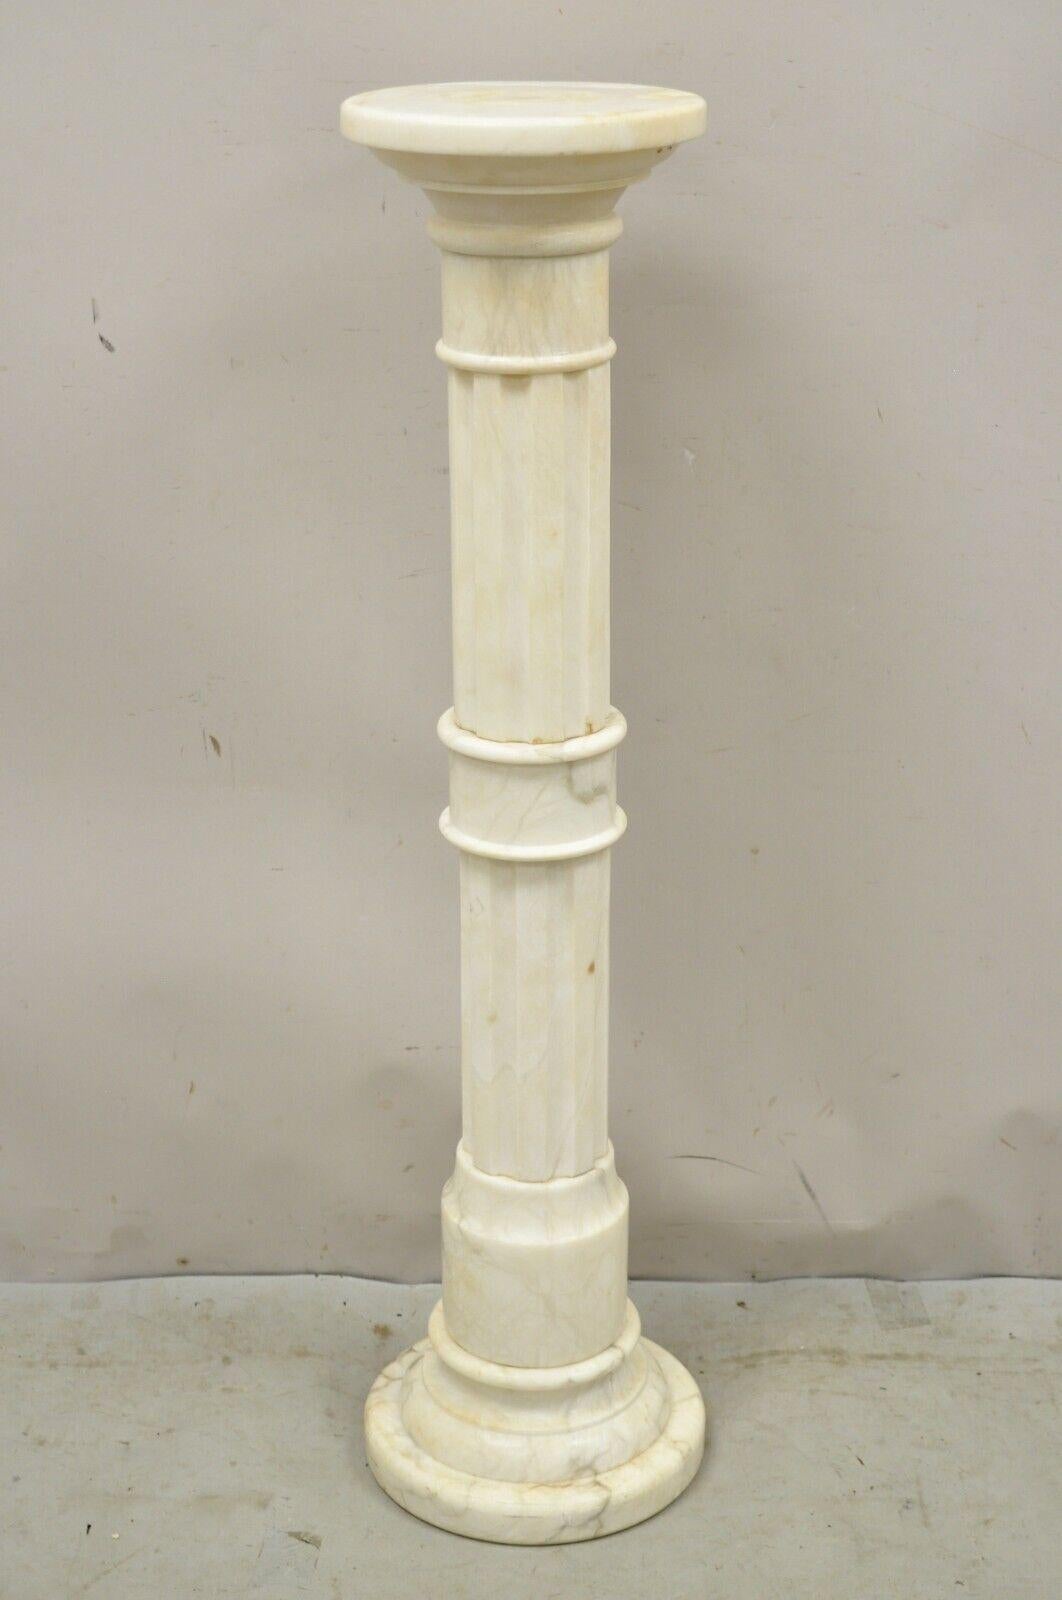 Antique Italian Classical Style White Marble Round Column Pedestal Plant Stand. Circa Early 20th Century. Measurements: 44